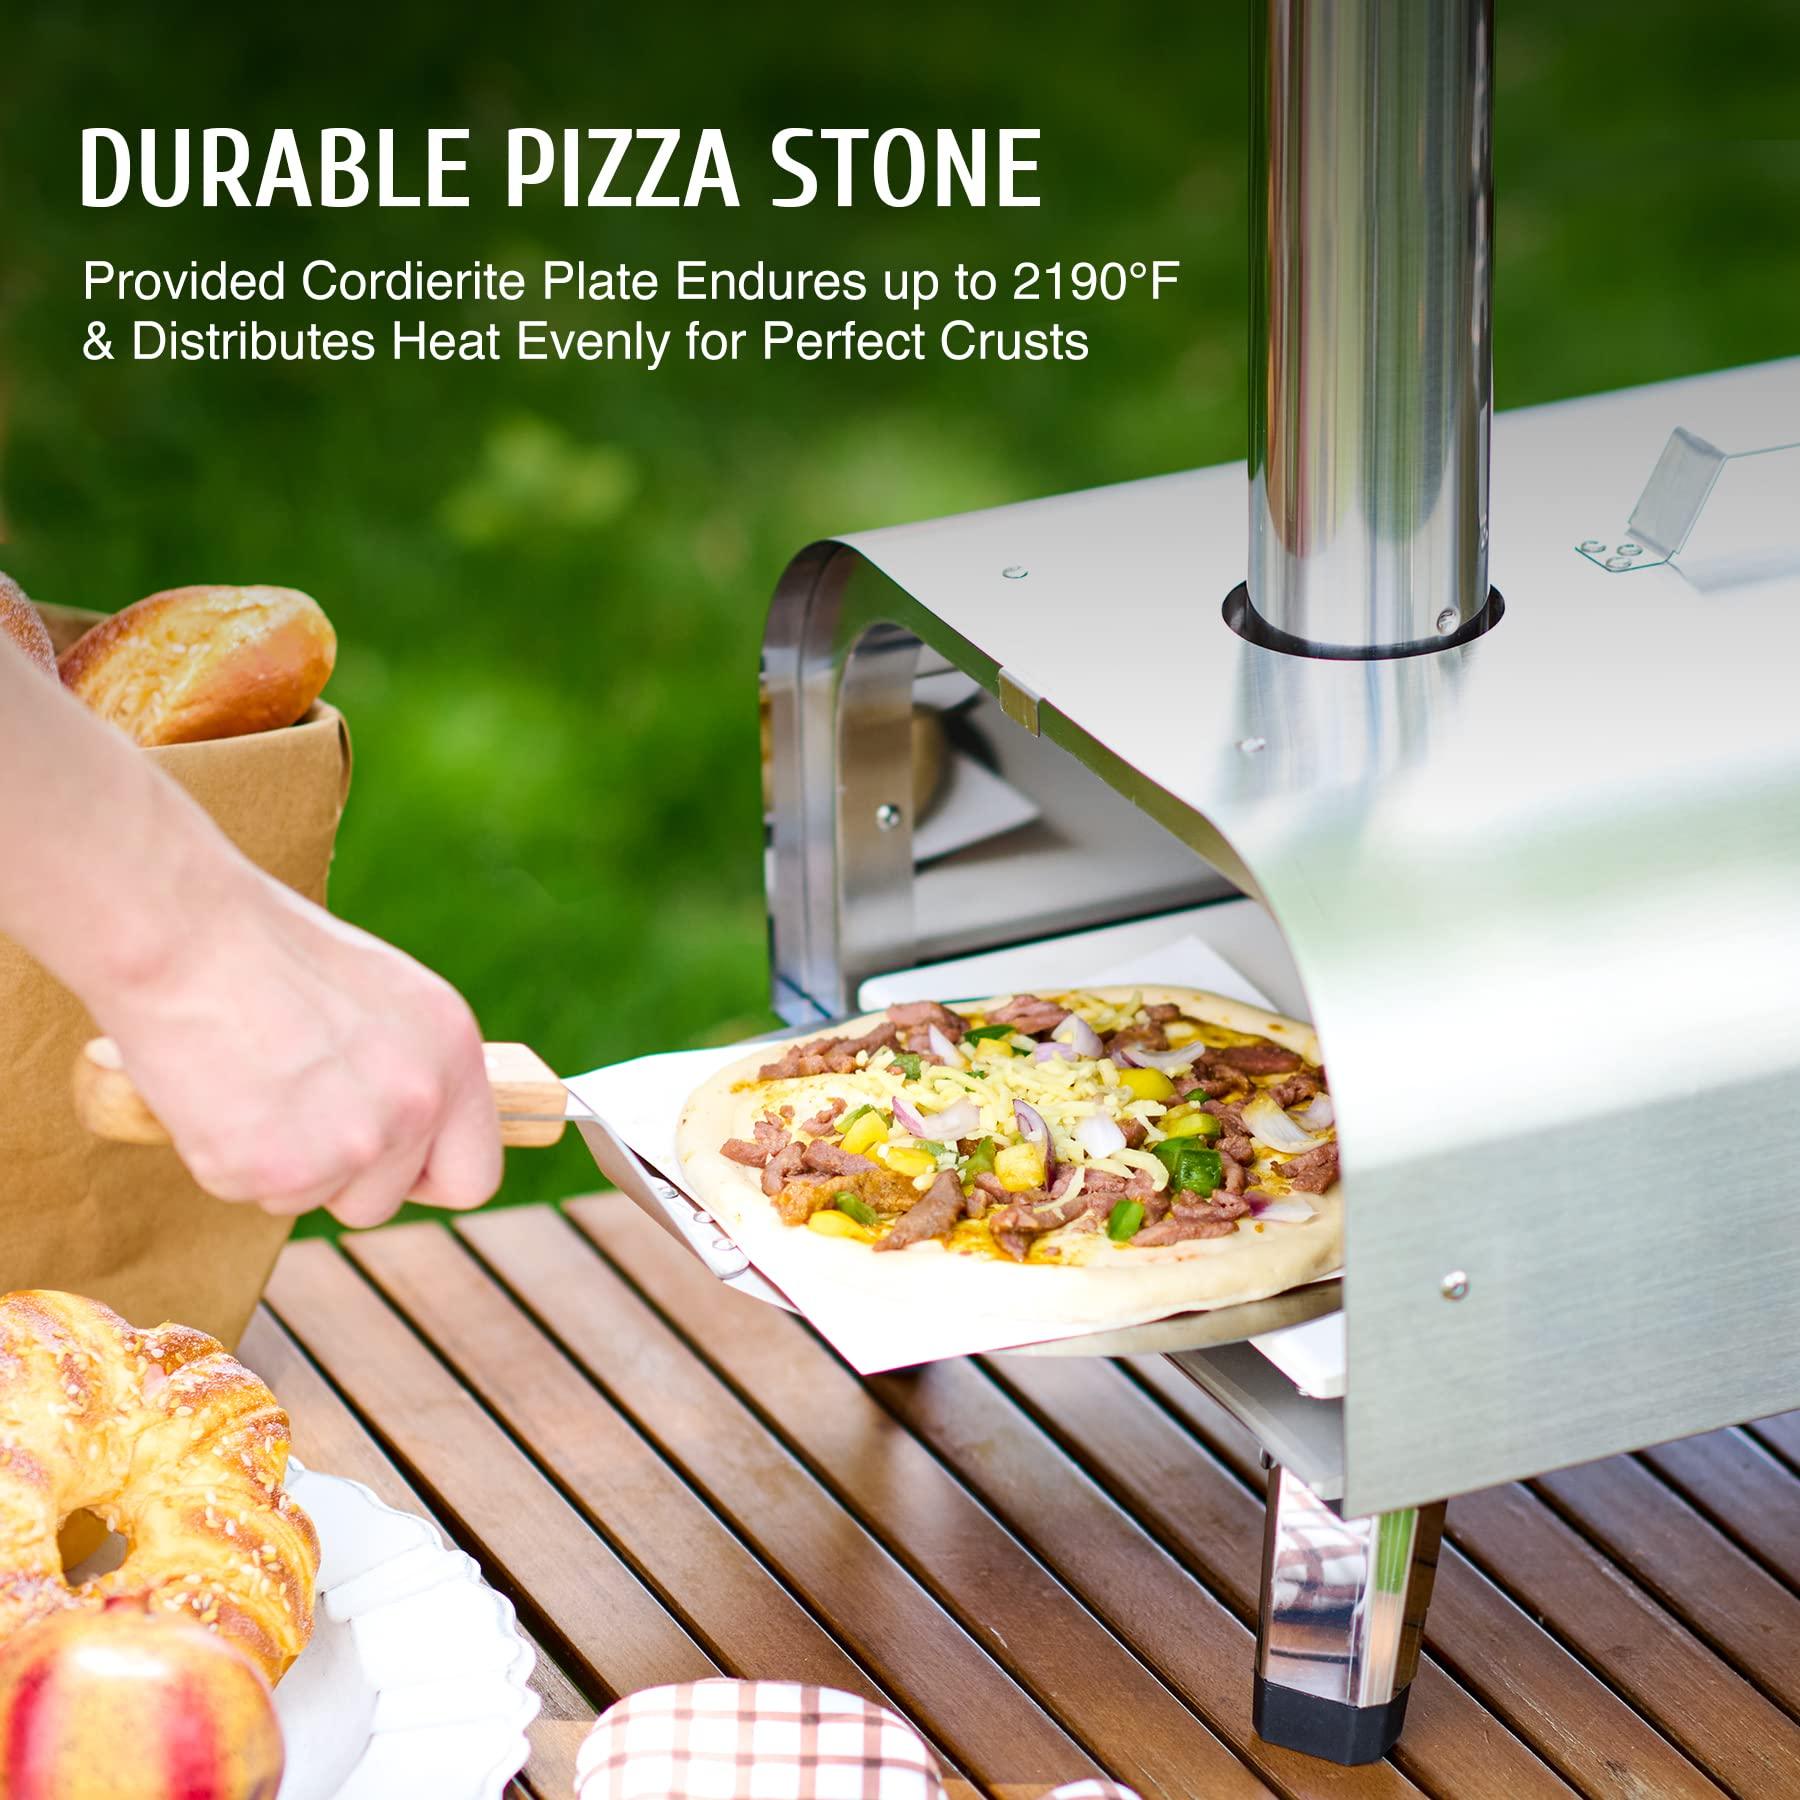 CO-Z 12 Portable Wood Pellet Pizza Oven Outdoor, Wood Fired Pizza Oven,Stainless Steel Wood Burning Pizza Maker Stove with Built-in Thermometer Pizza Stone Peel Cutter Bag for Outside Kitchen Backyard - CookCave